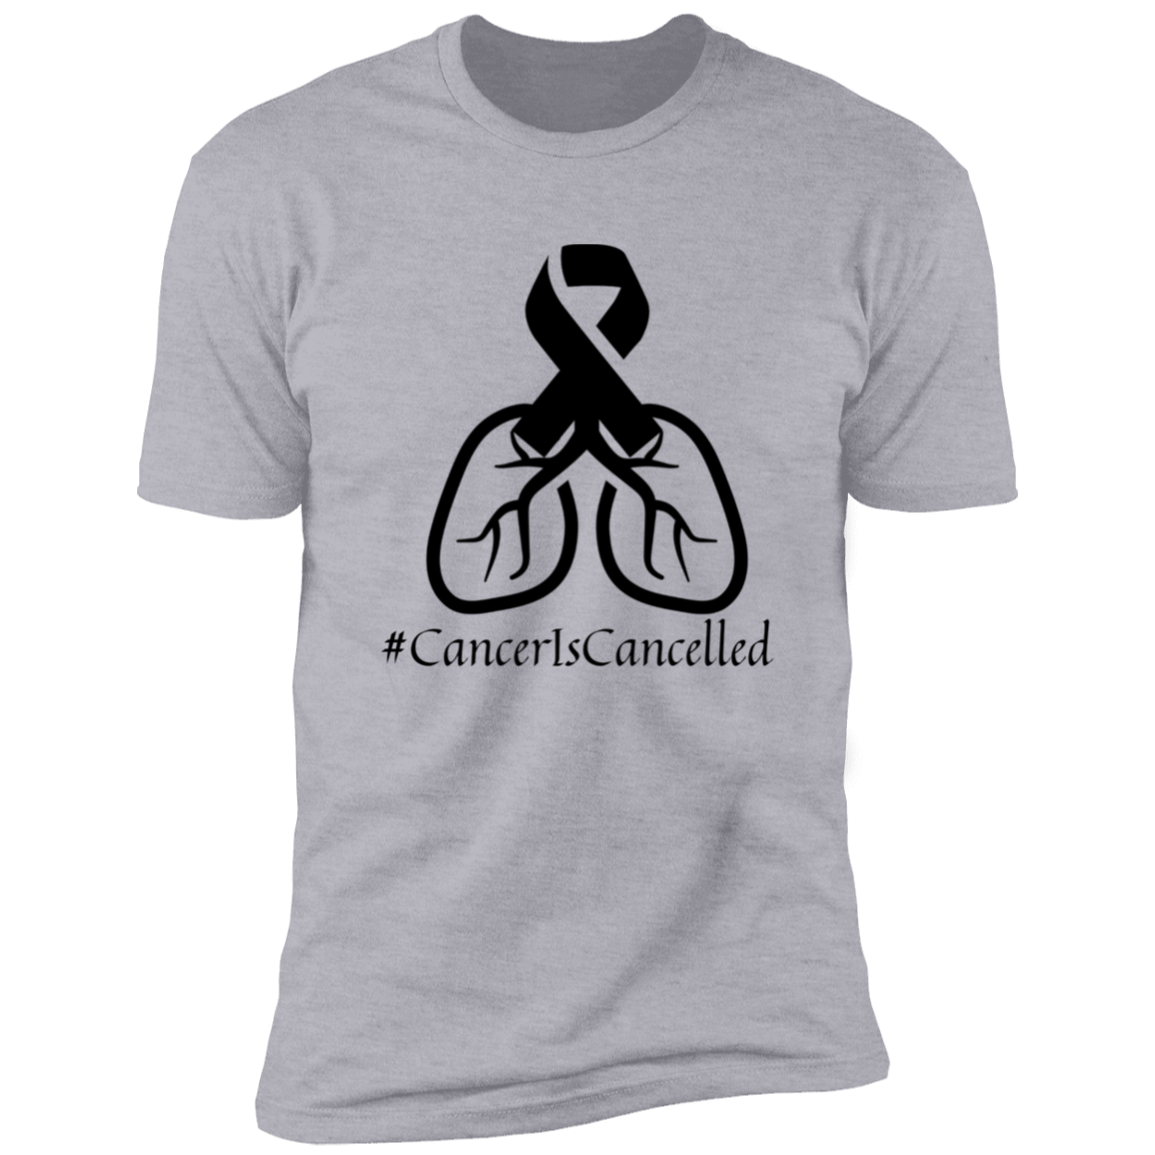 Cancer Is Cancelled Tee - Black logo